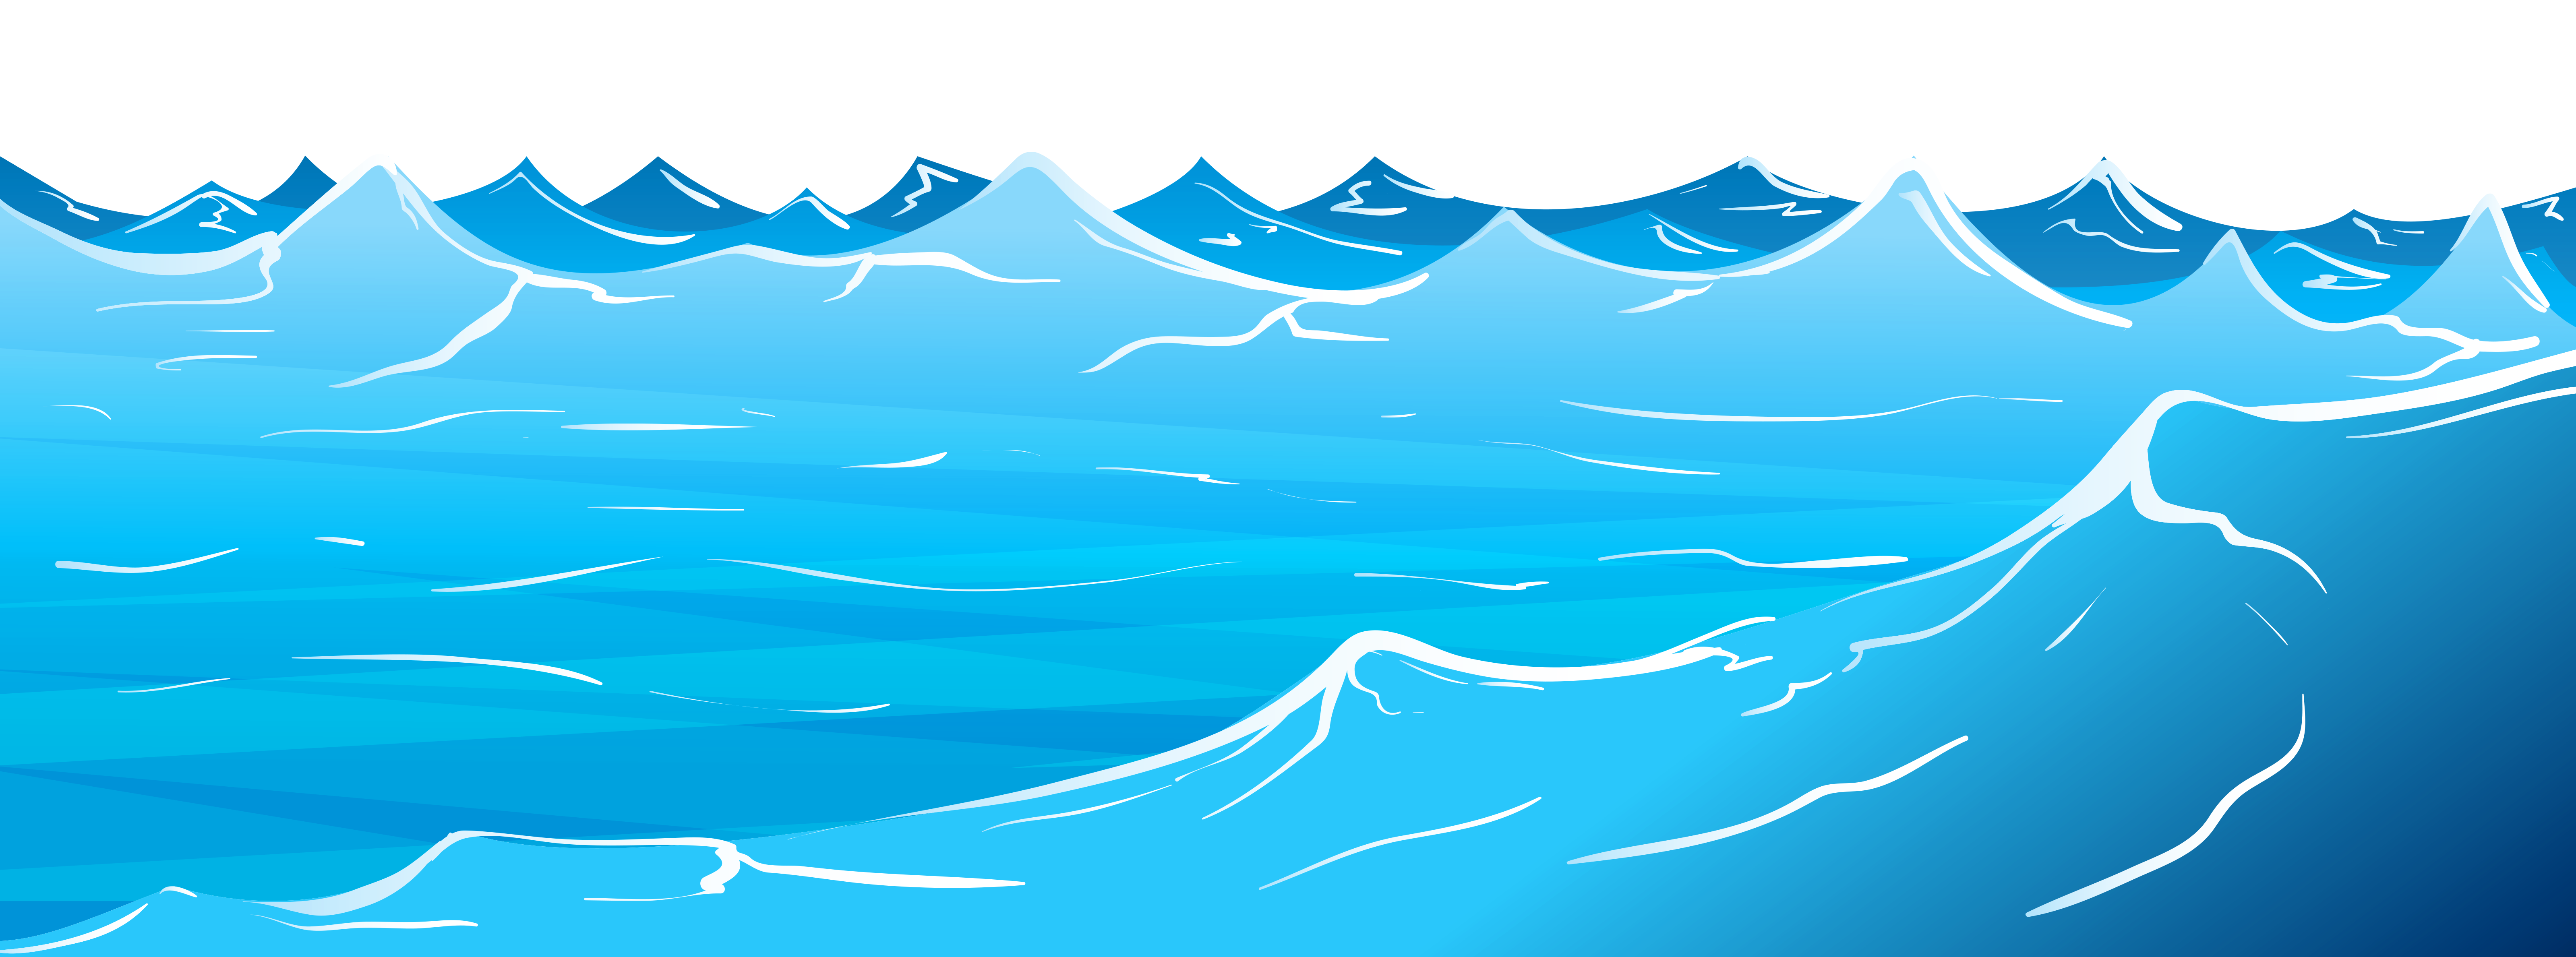 Mountain clipart water. What is in ocean